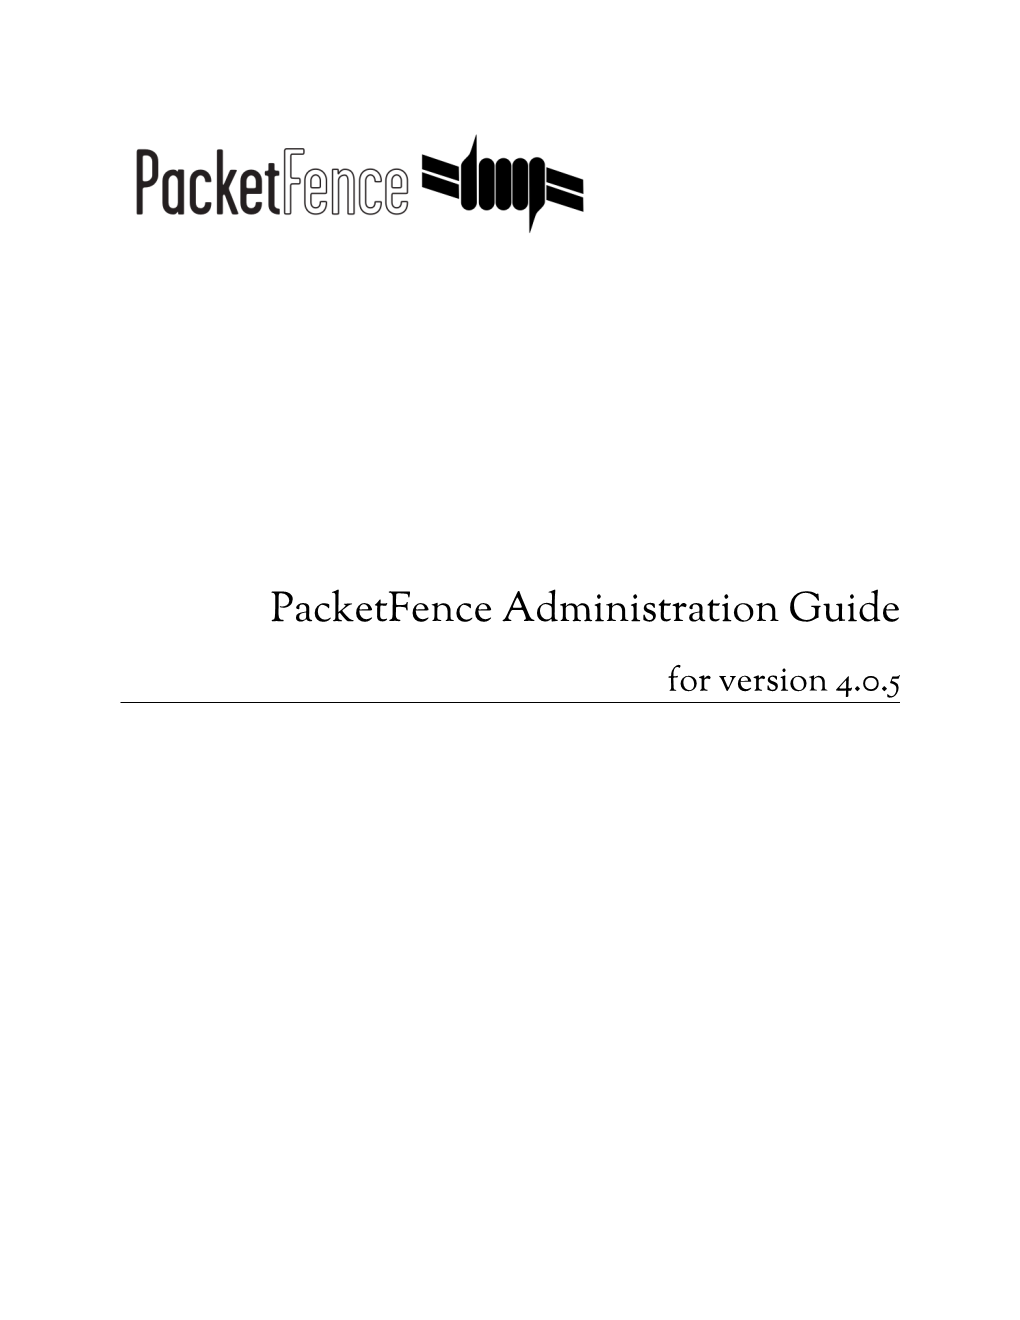 Packetfence Administration Guide for Version 4.0.5 Packetfence Administration Guide by Inverse Inc